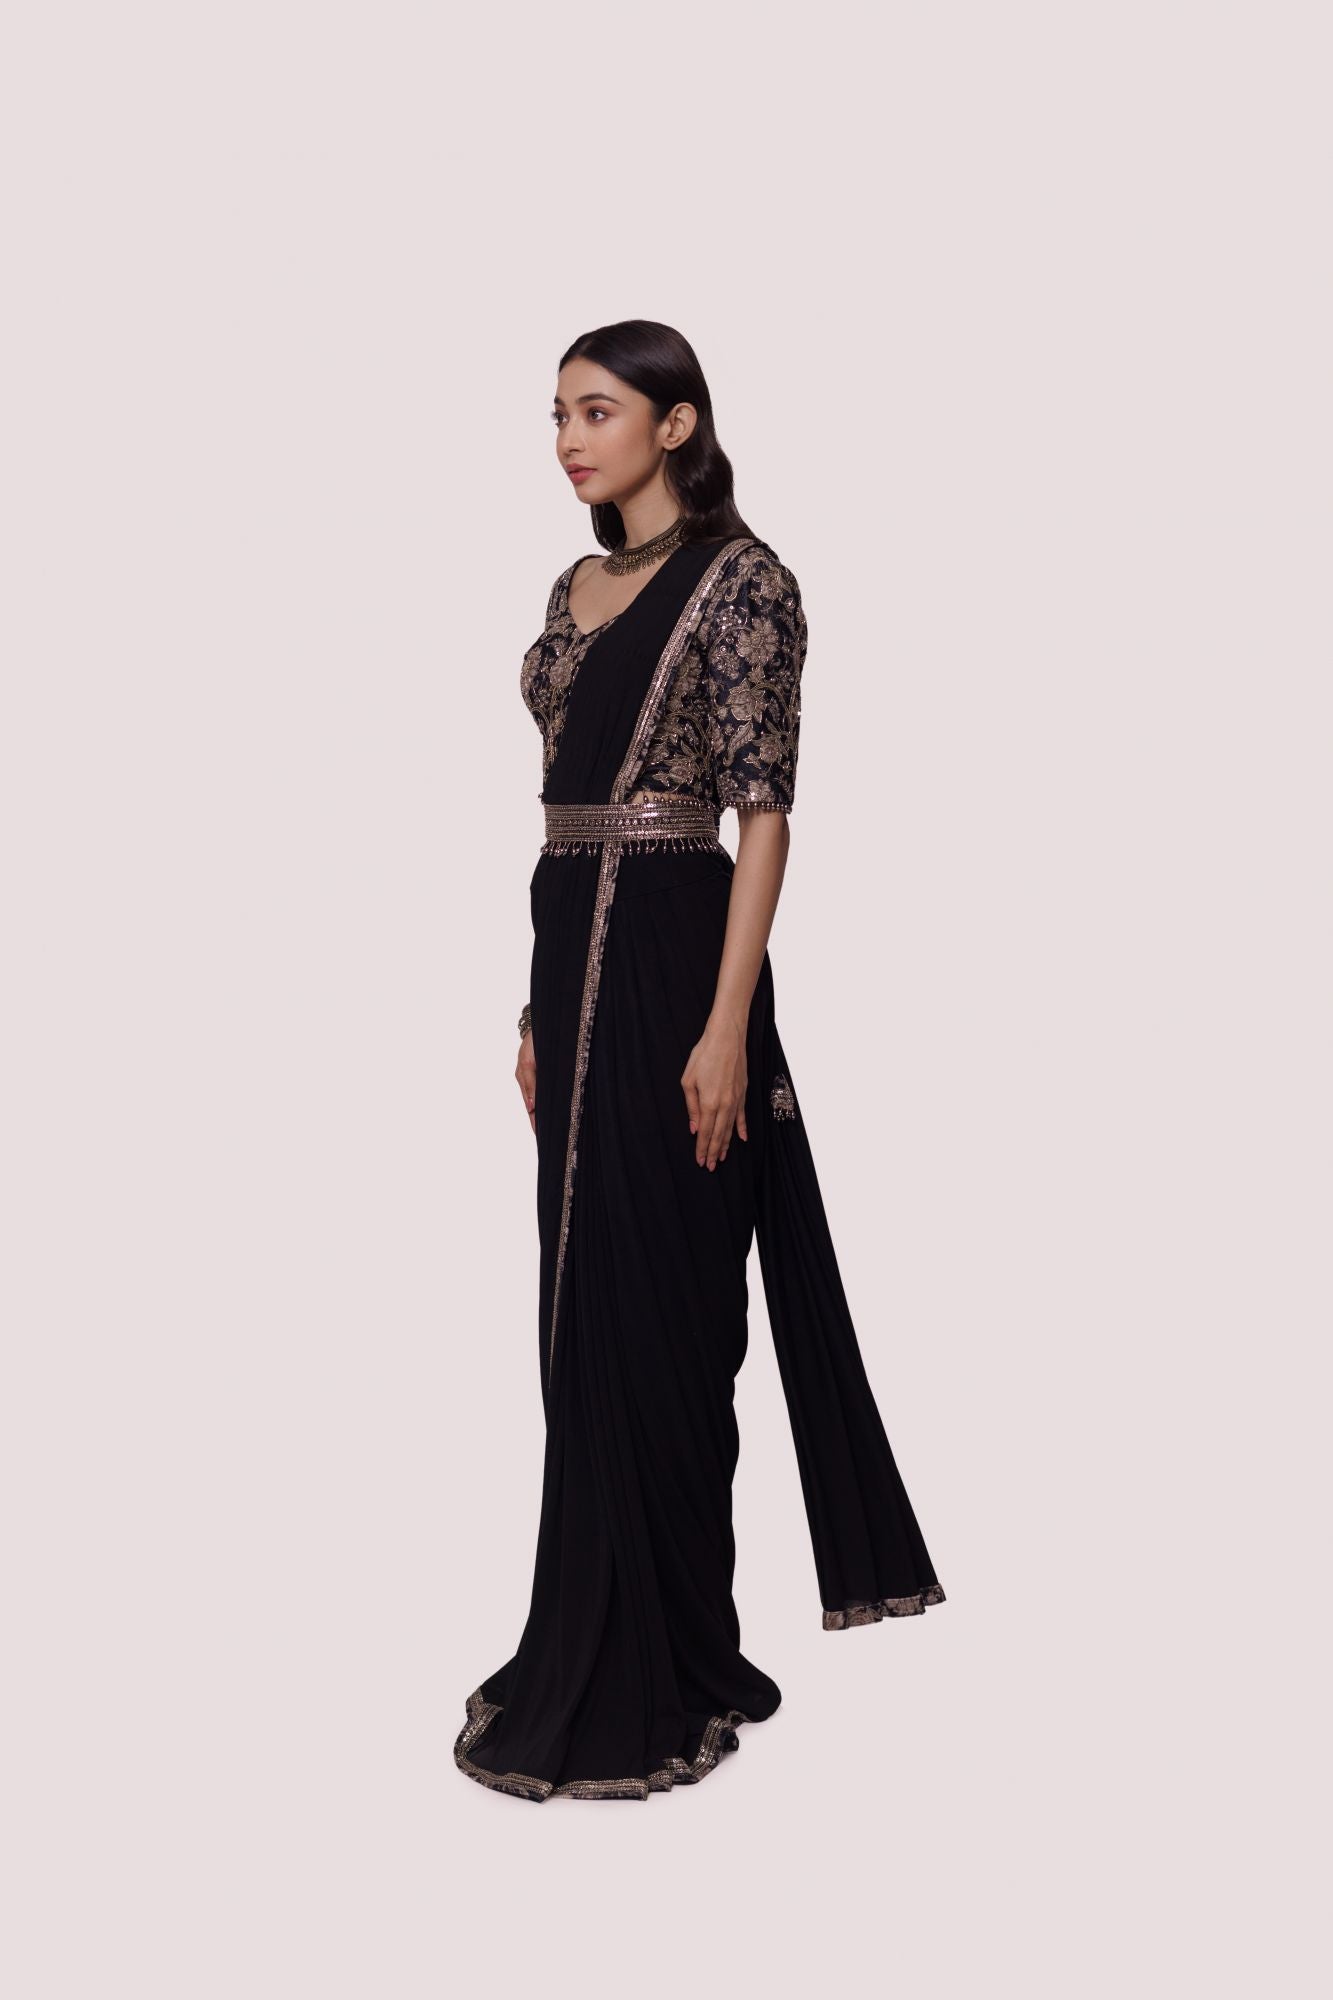 Shop black net saree with embroidered edges and a narrow belt. Make a fashion statement on festive occasions and weddings with designer sarees, designer suits, Indian dresses, Anarkali suits, palazzo suits, designer gowns, sharara suits, and embroidered sarees from Pure Elegance Indian fashion store in the USA.